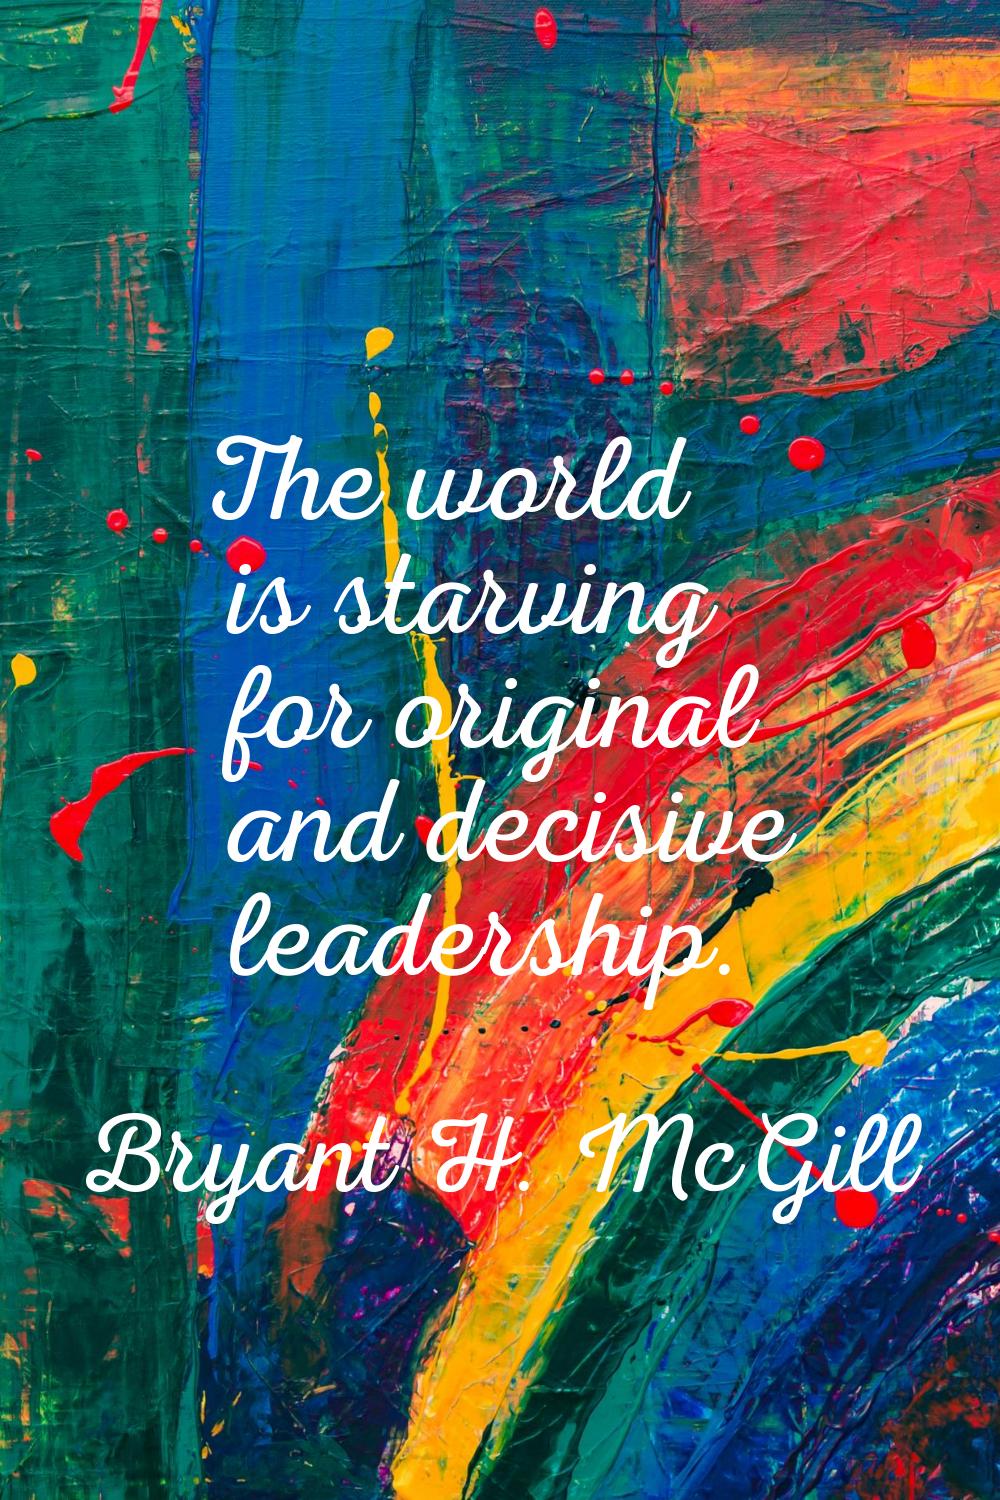 The world is starving for original and decisive leadership.